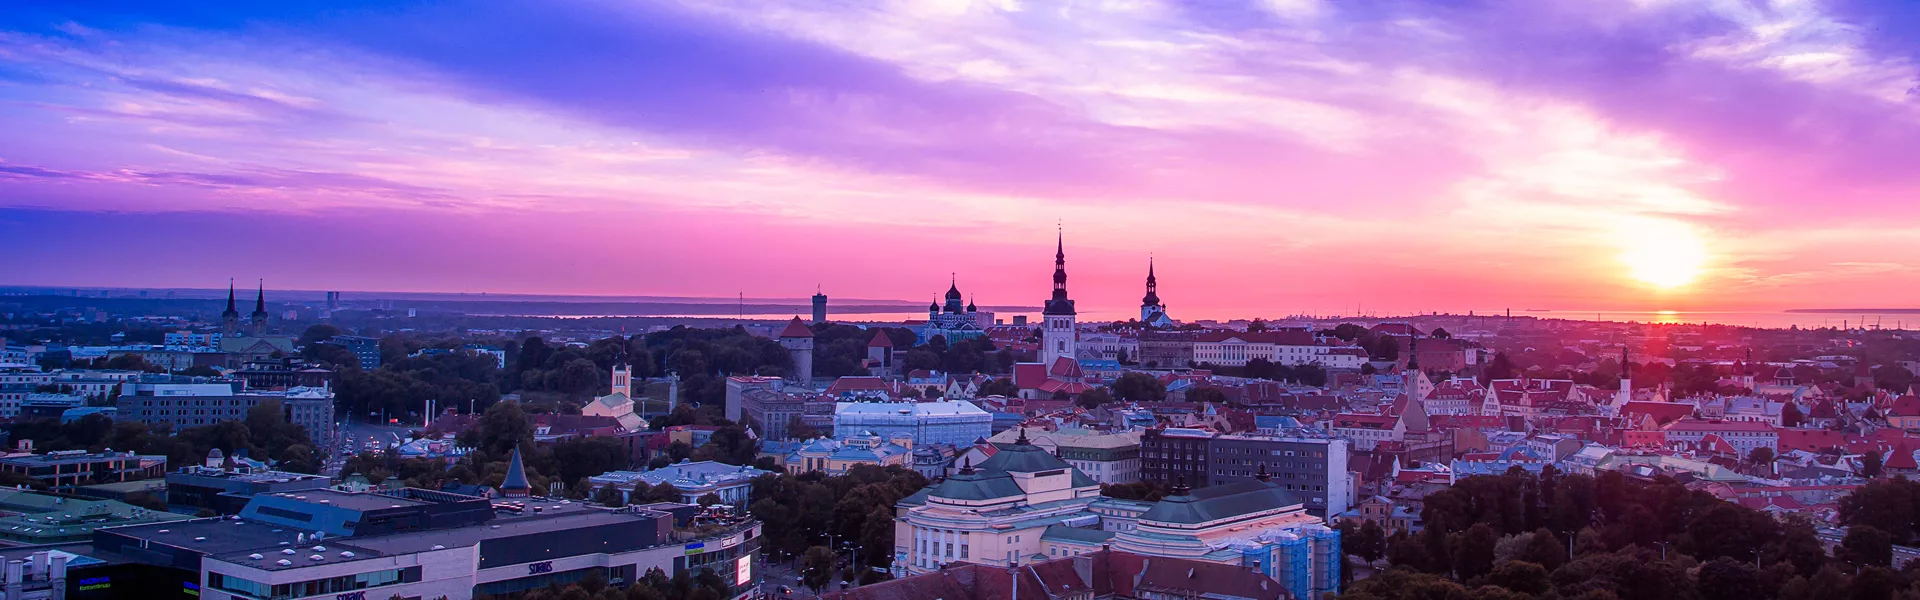 Estonia Guided Tours and Travel Guide